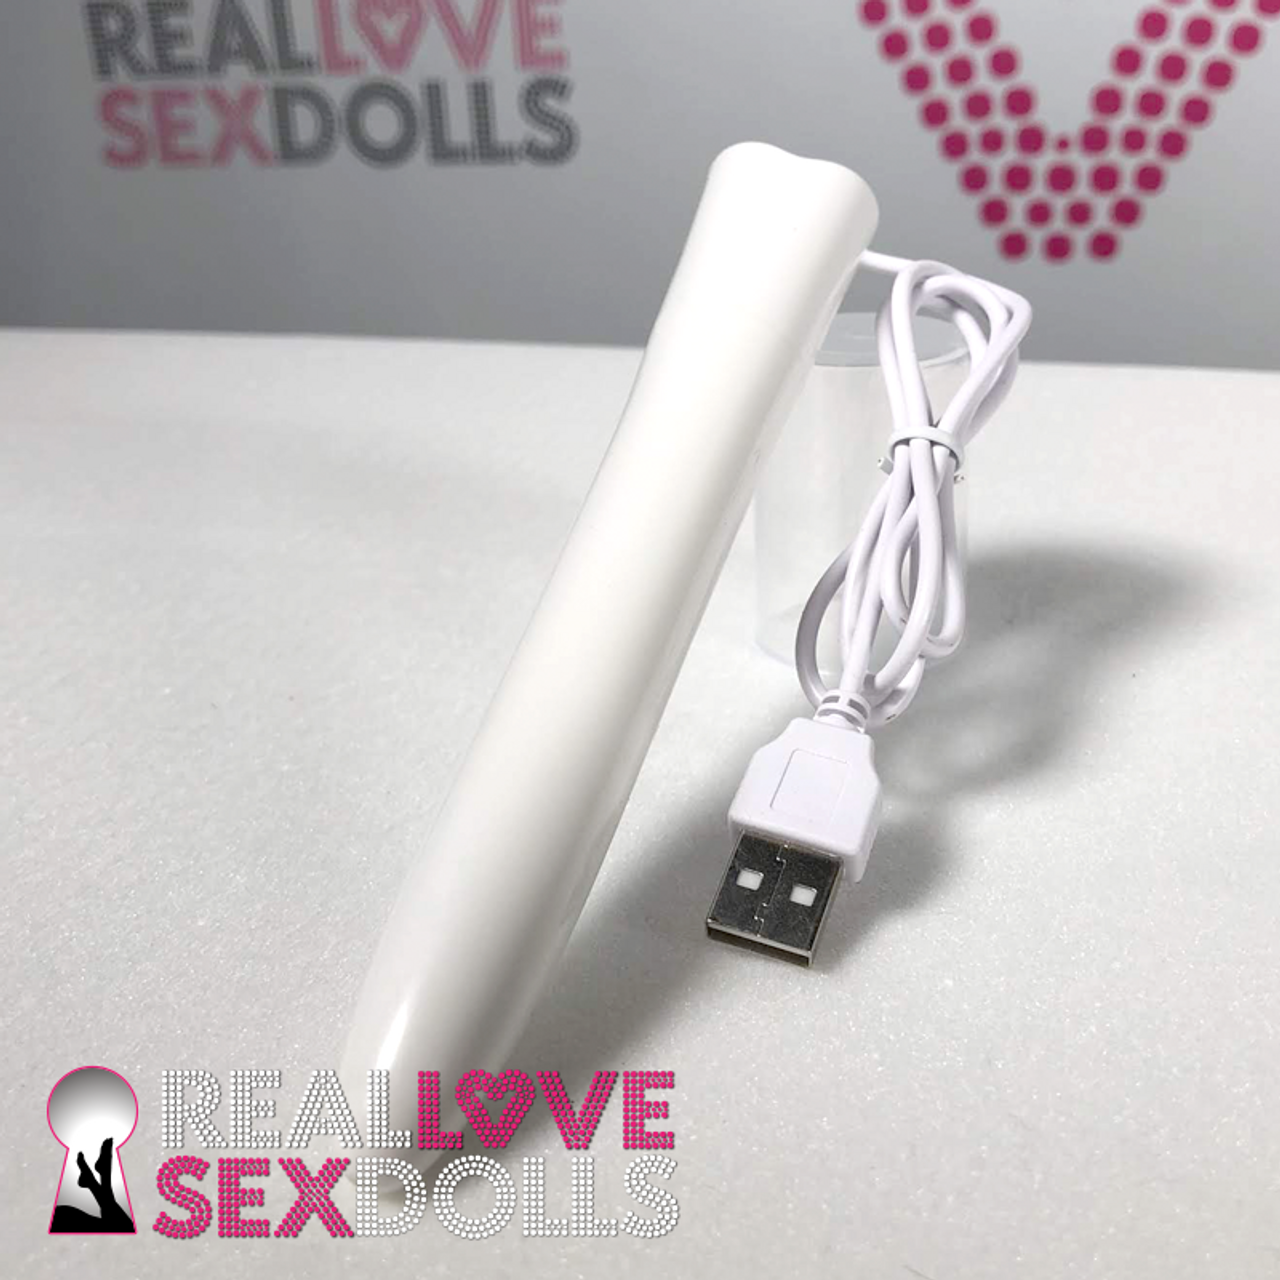 Vagina / Anal Warming Wand for TPE Sex Dolls